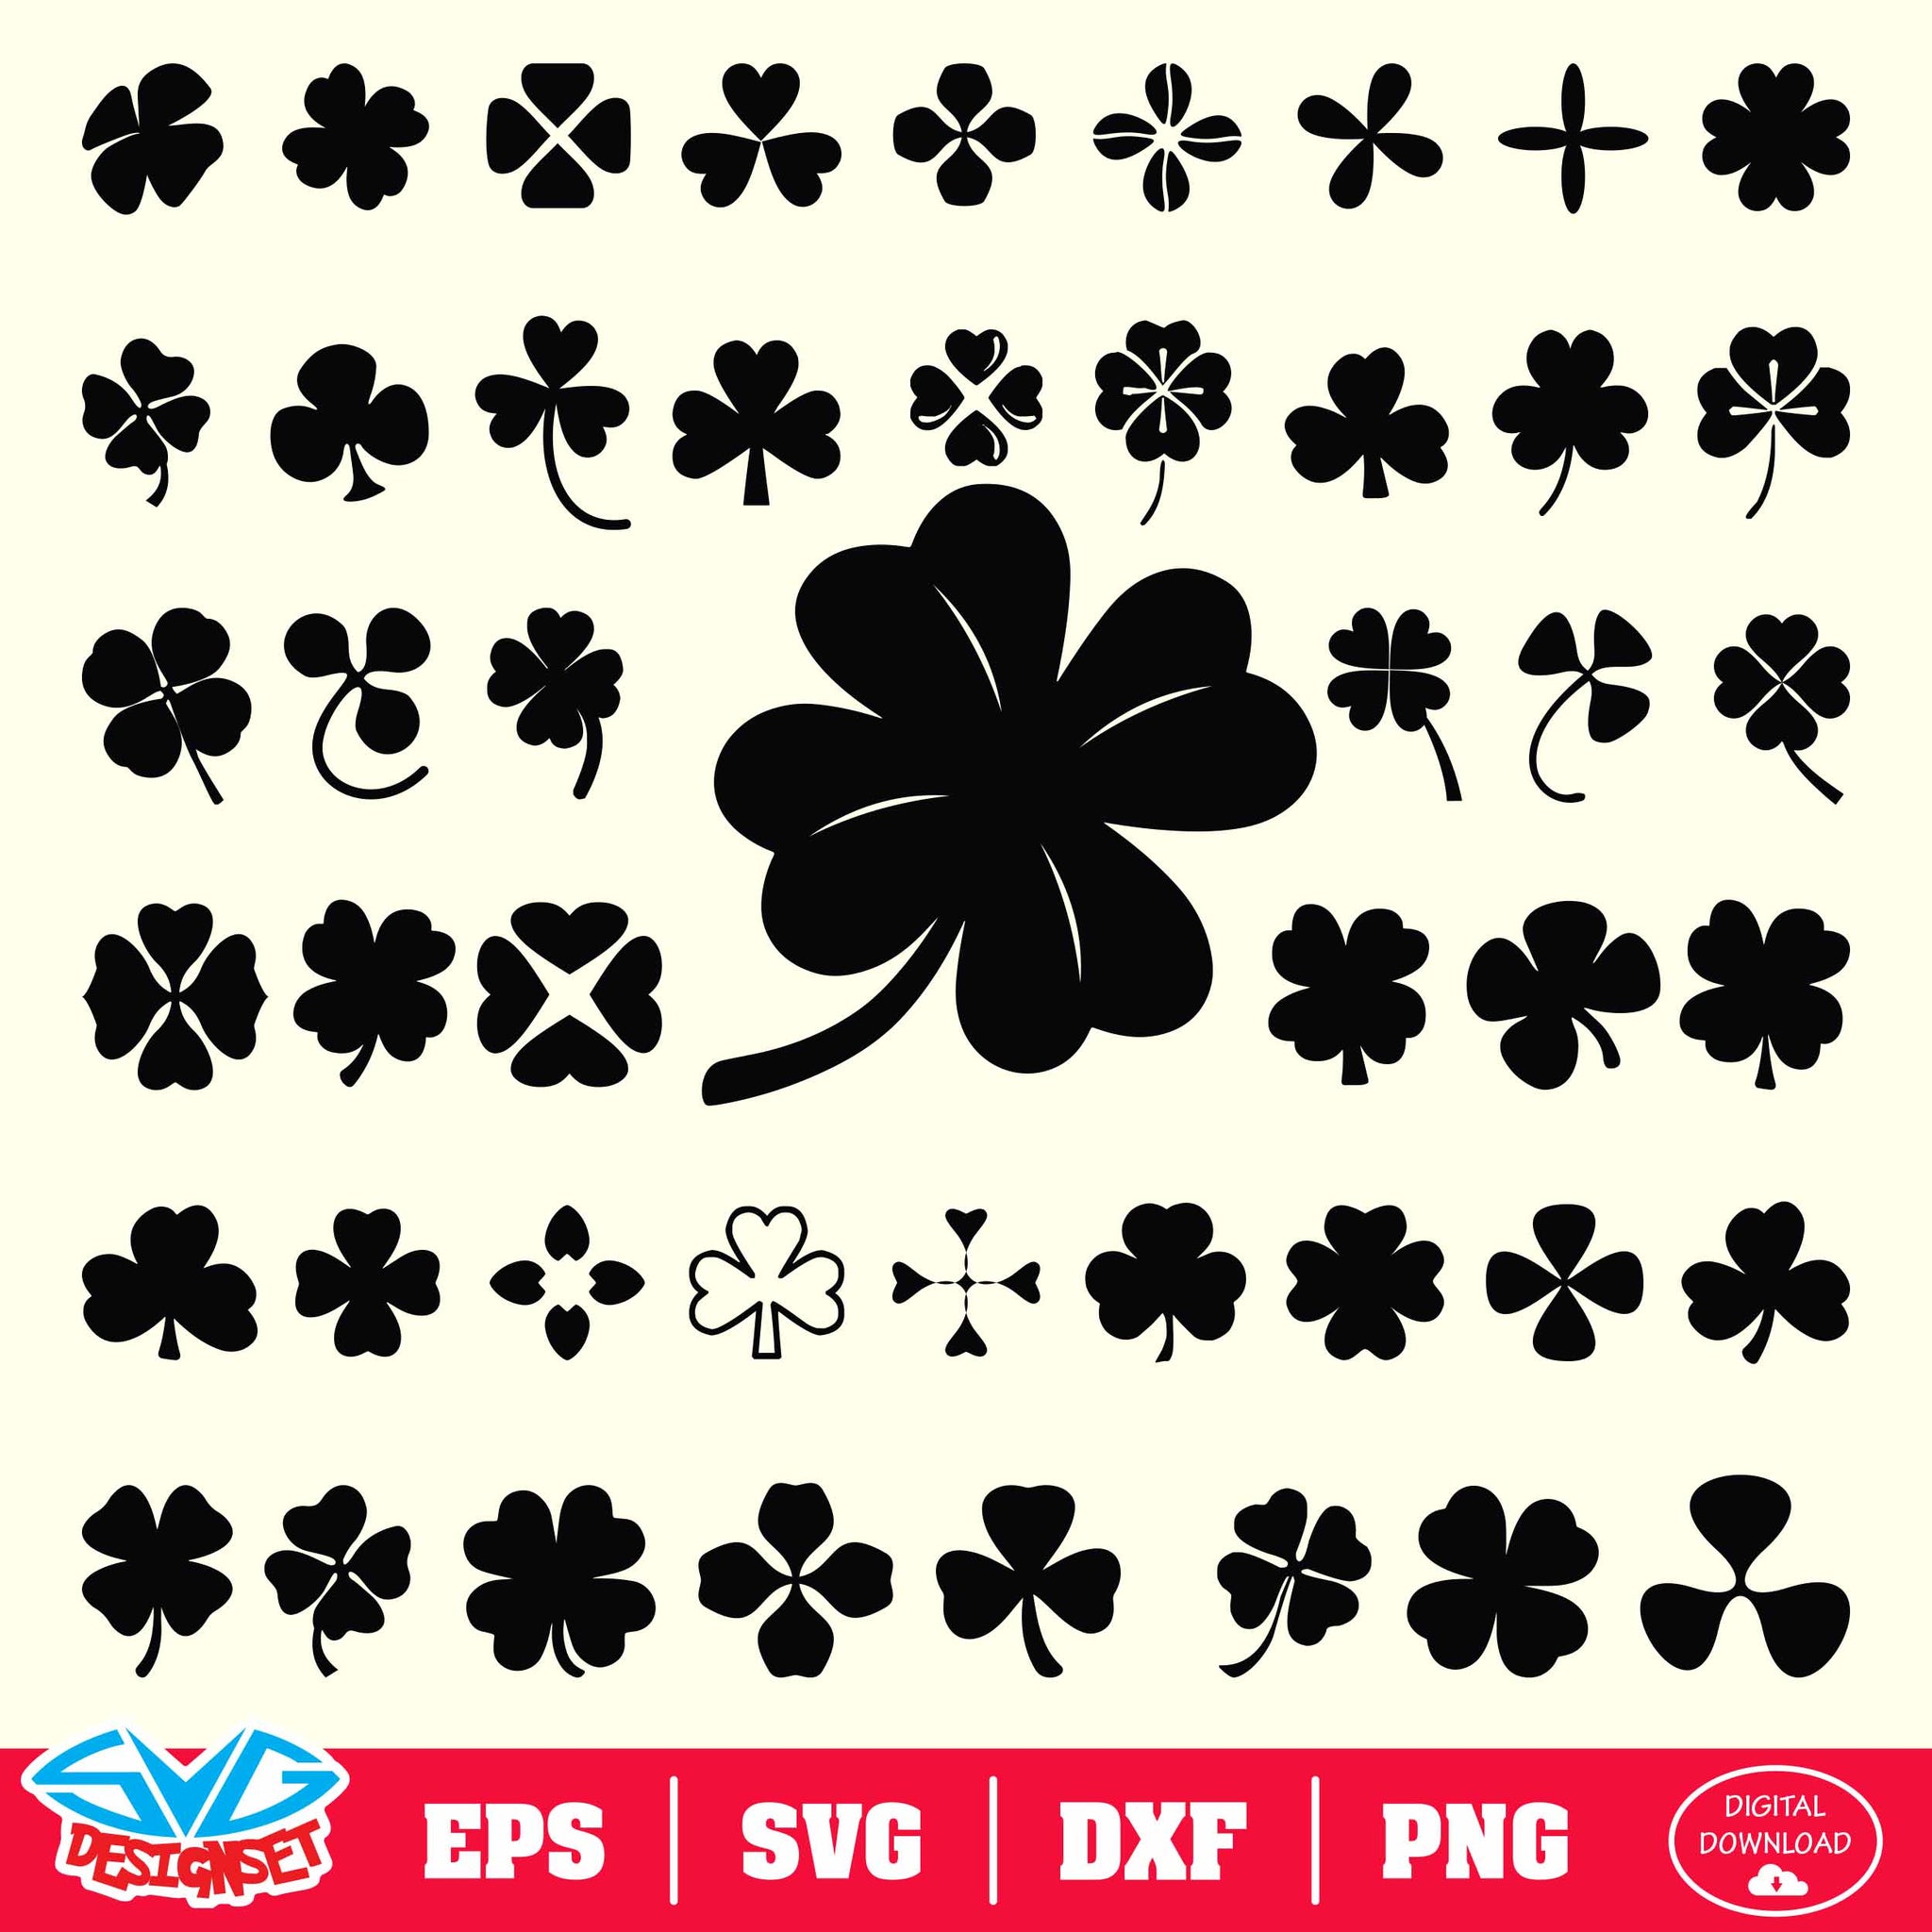 St. Patrick's Day Bundle Svg, Dxf, Eps, Png, Clipart, Silhouette and Cutfiles #008 - SVGDesignSets